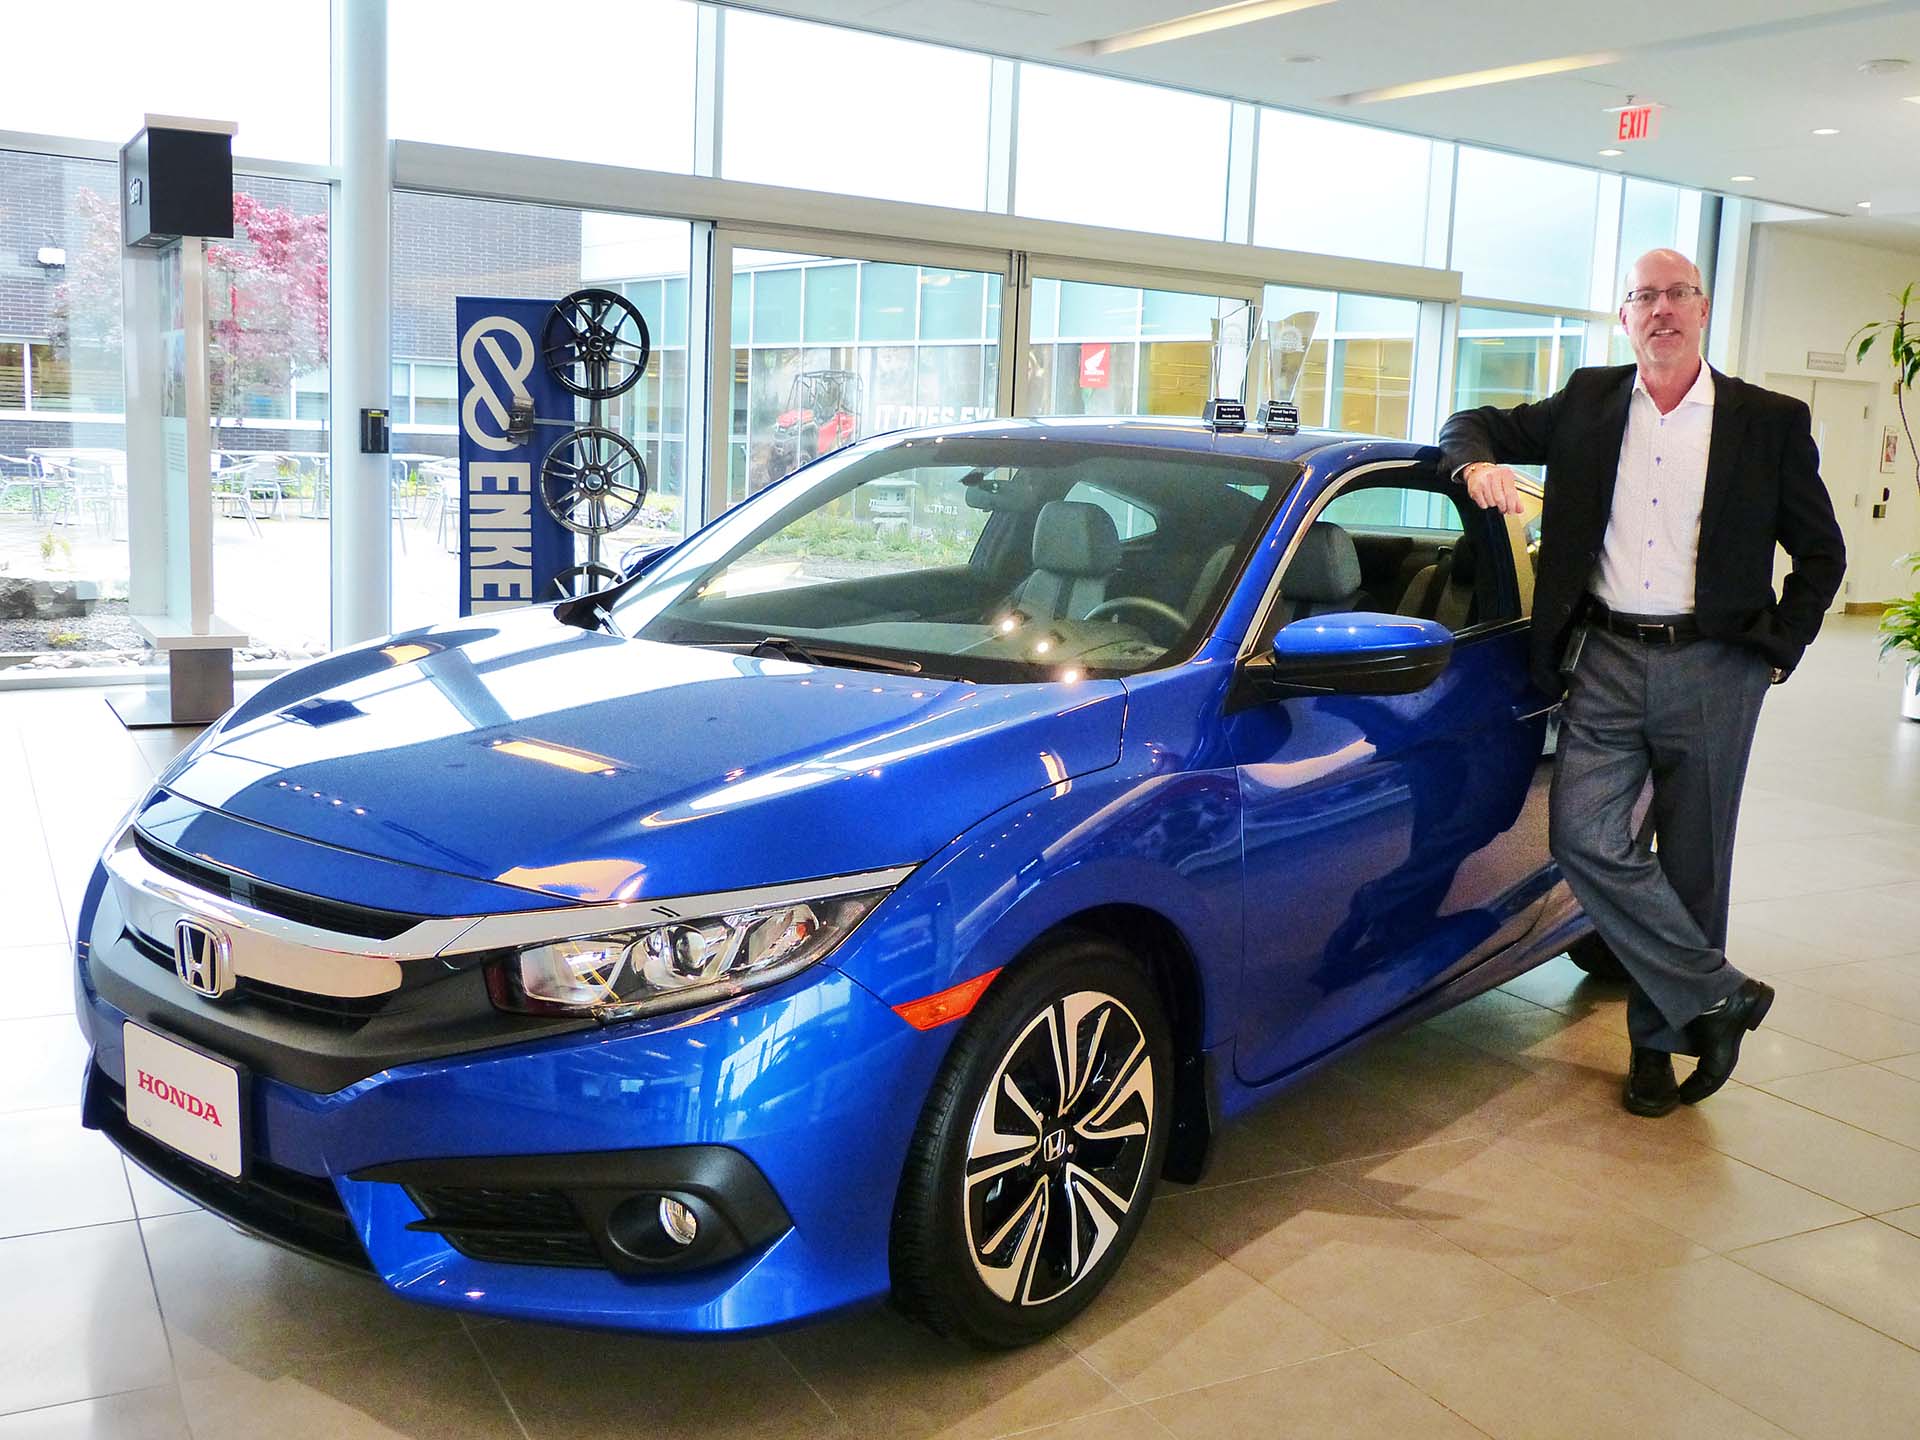 Honda Canada Senior Vice President, Operations, Dave Gardner, poses with the Honda Civic and his autoTRADER.ca Top Pick Trophies.